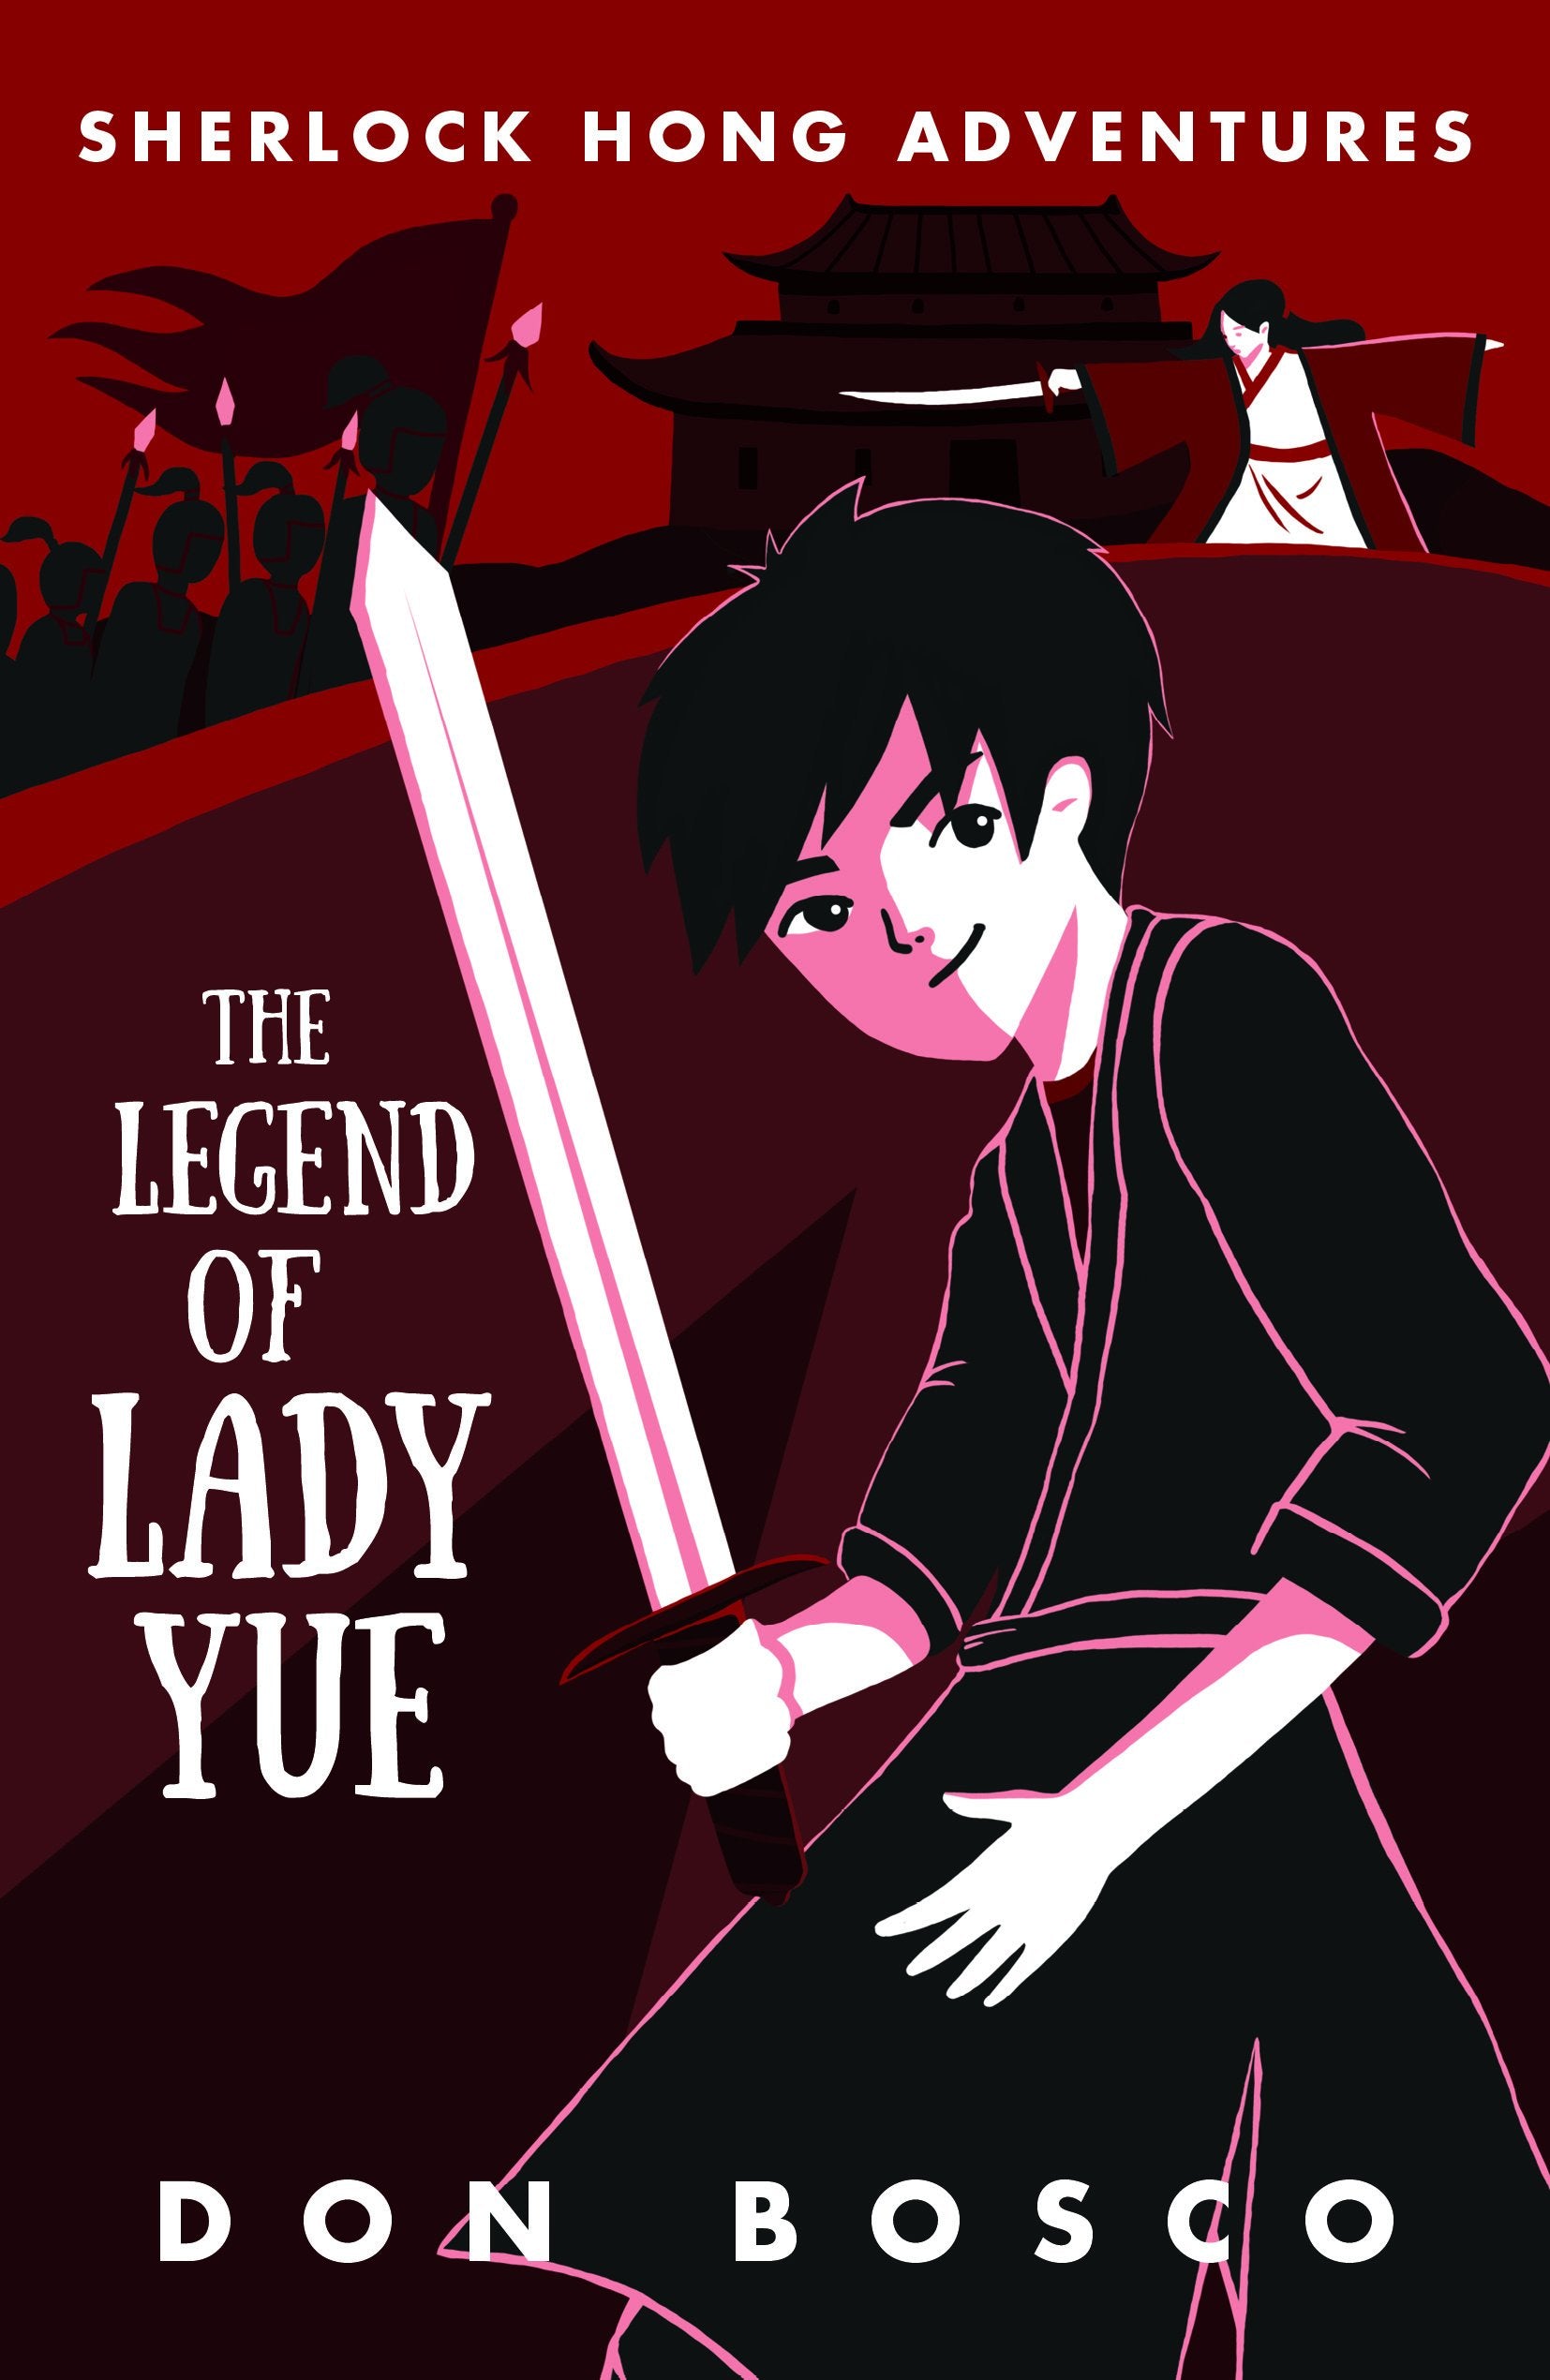 Sherlock Hong Adventures: The Legend of Lady Yue (Book 4)